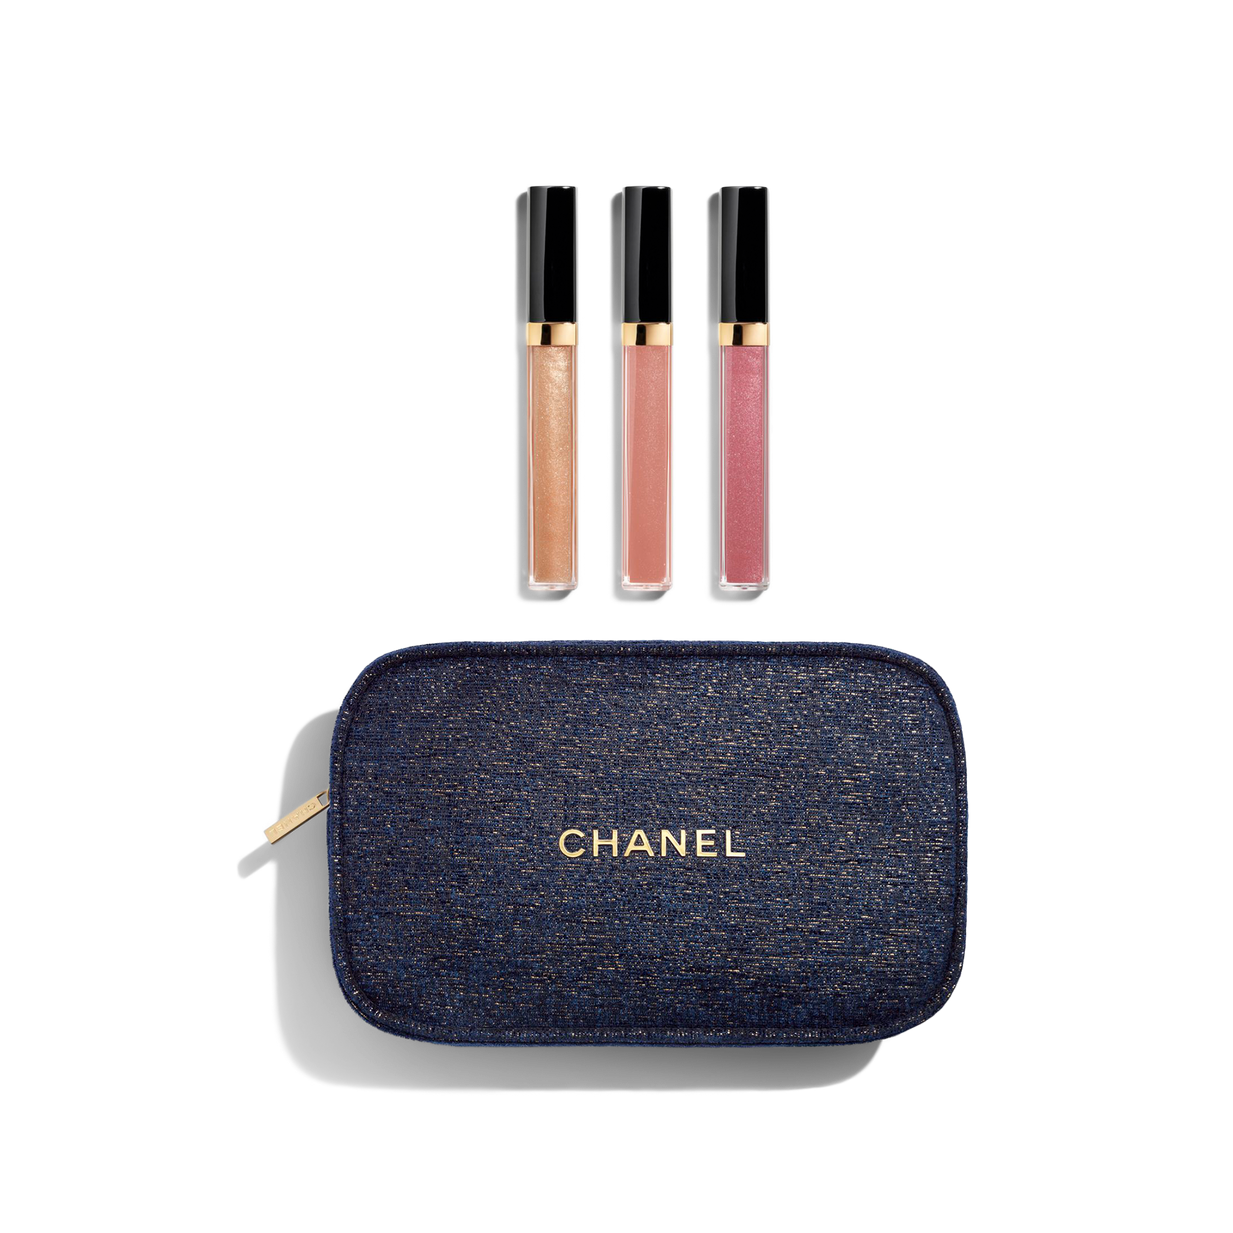 CHANEL NEW PURCHASE POLICY- Purchase limits 